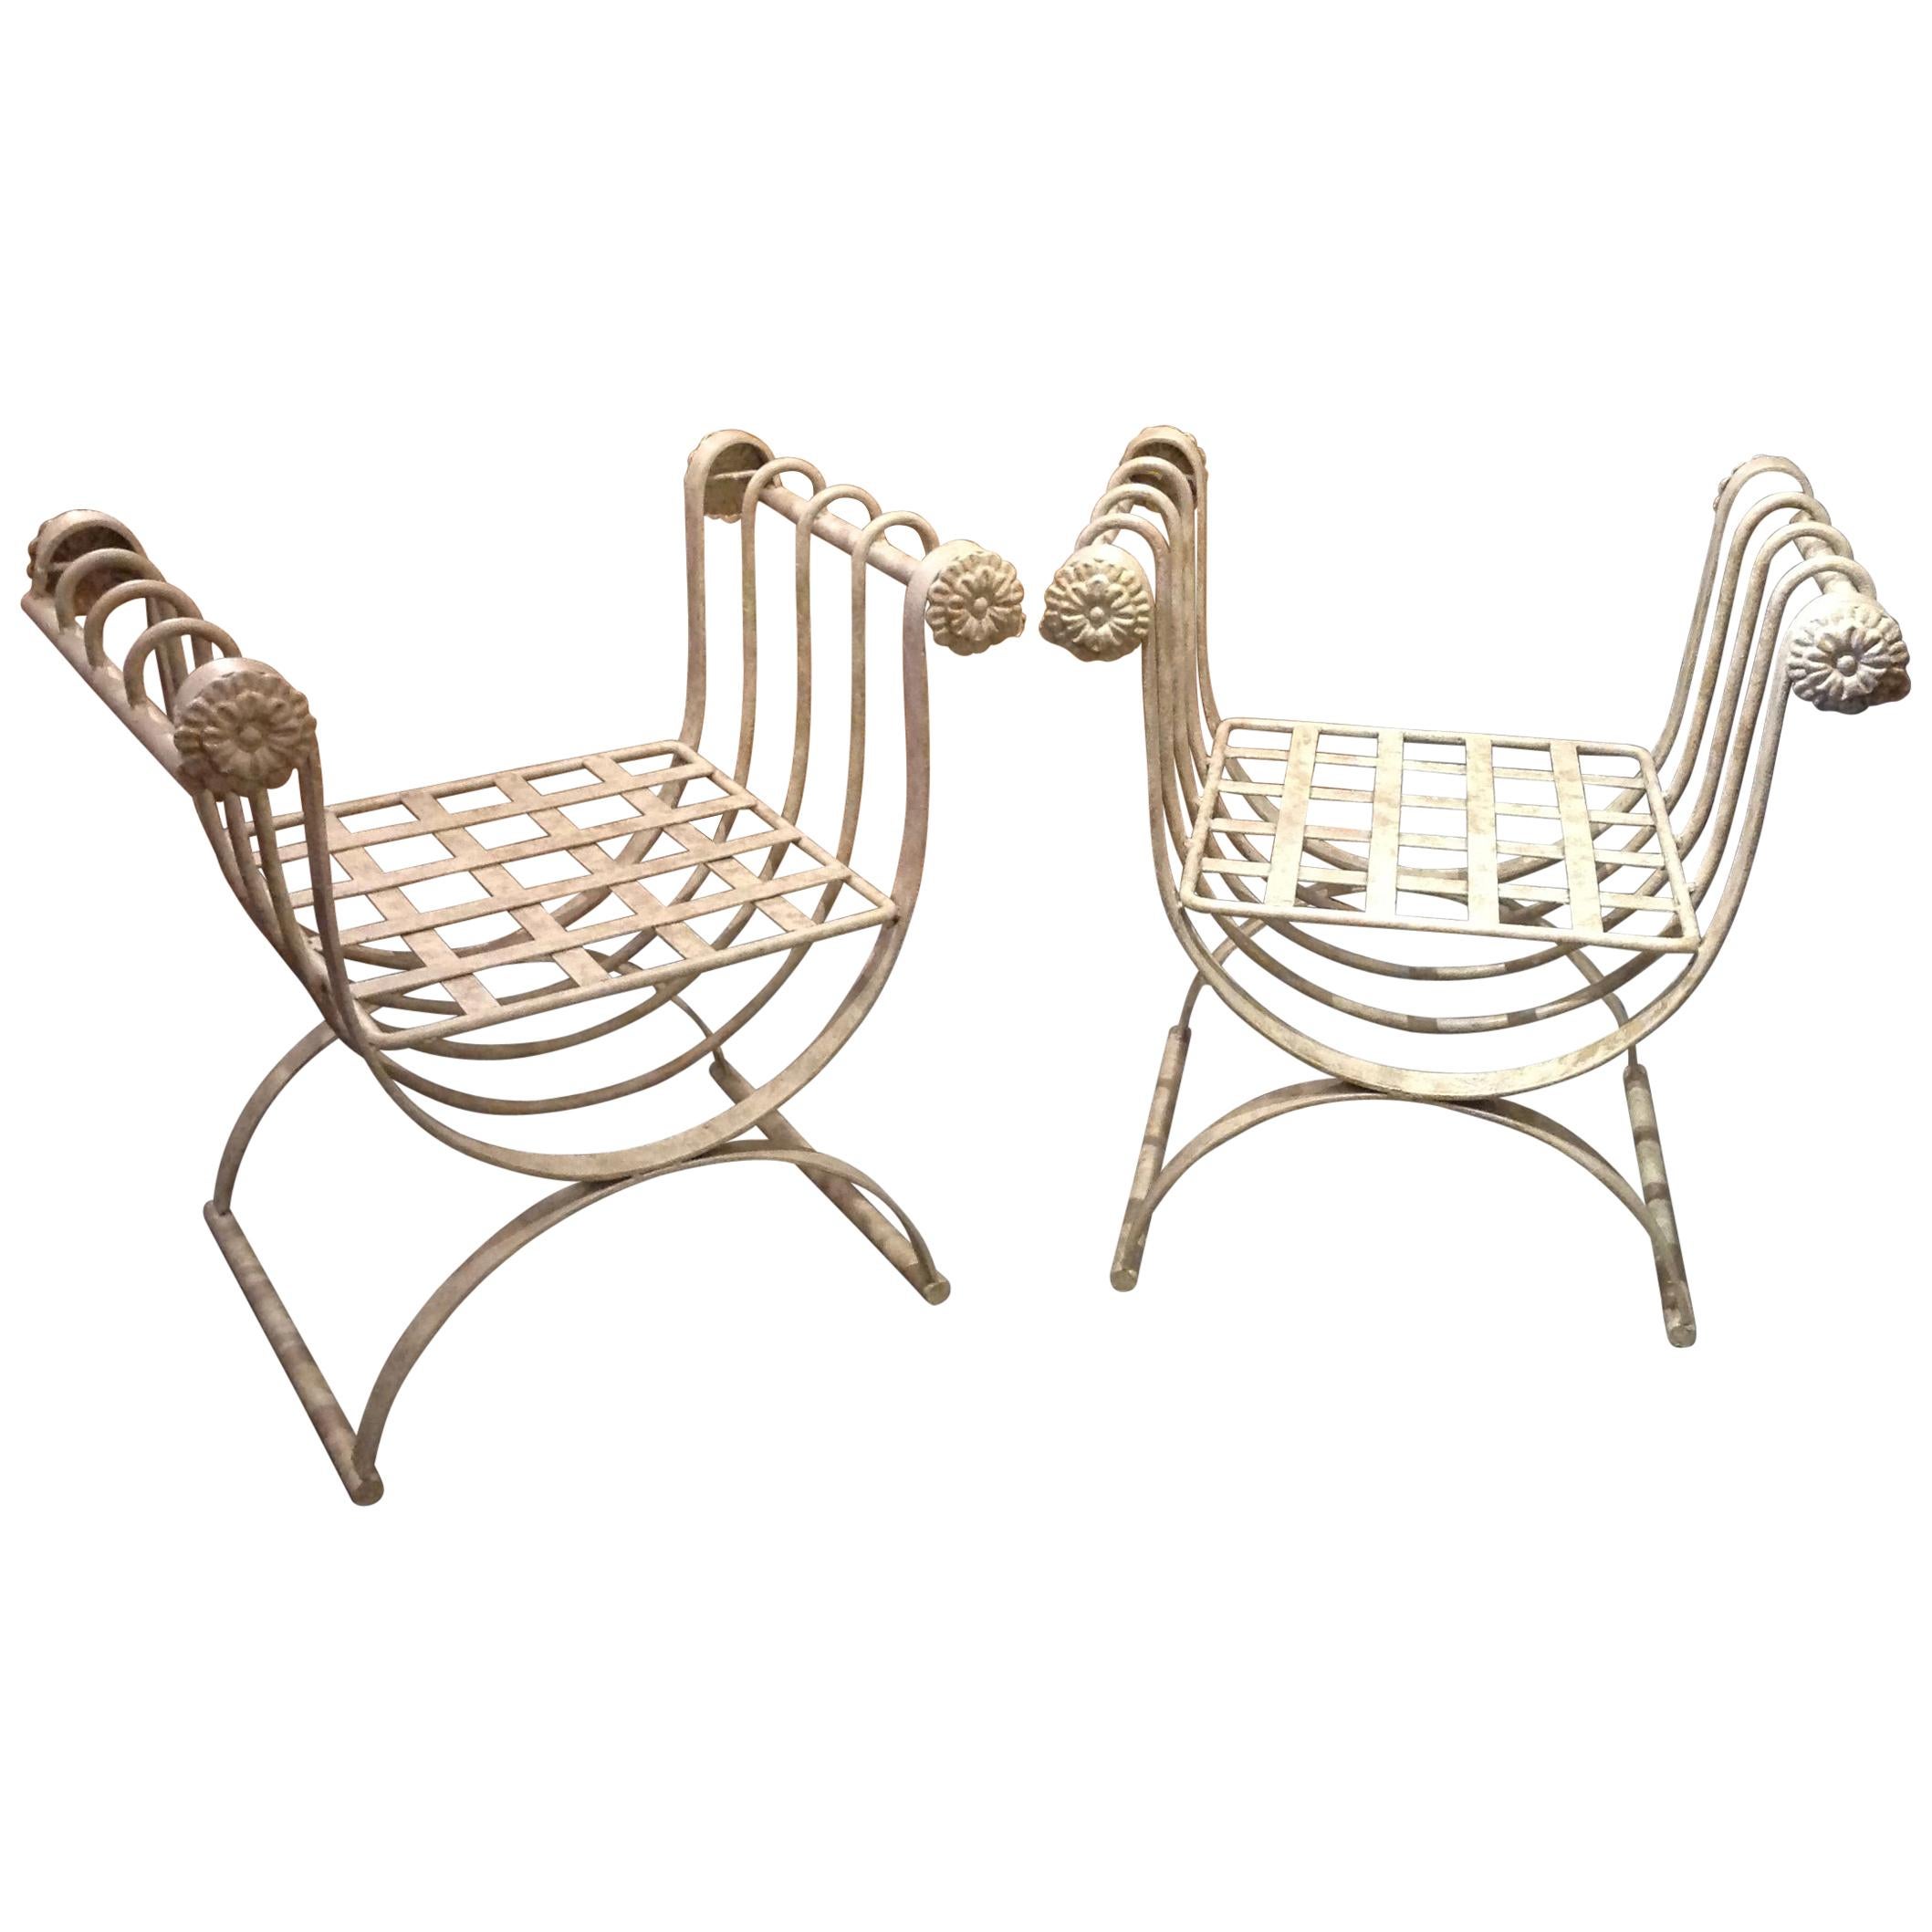 Pair of Iron Curule Benches